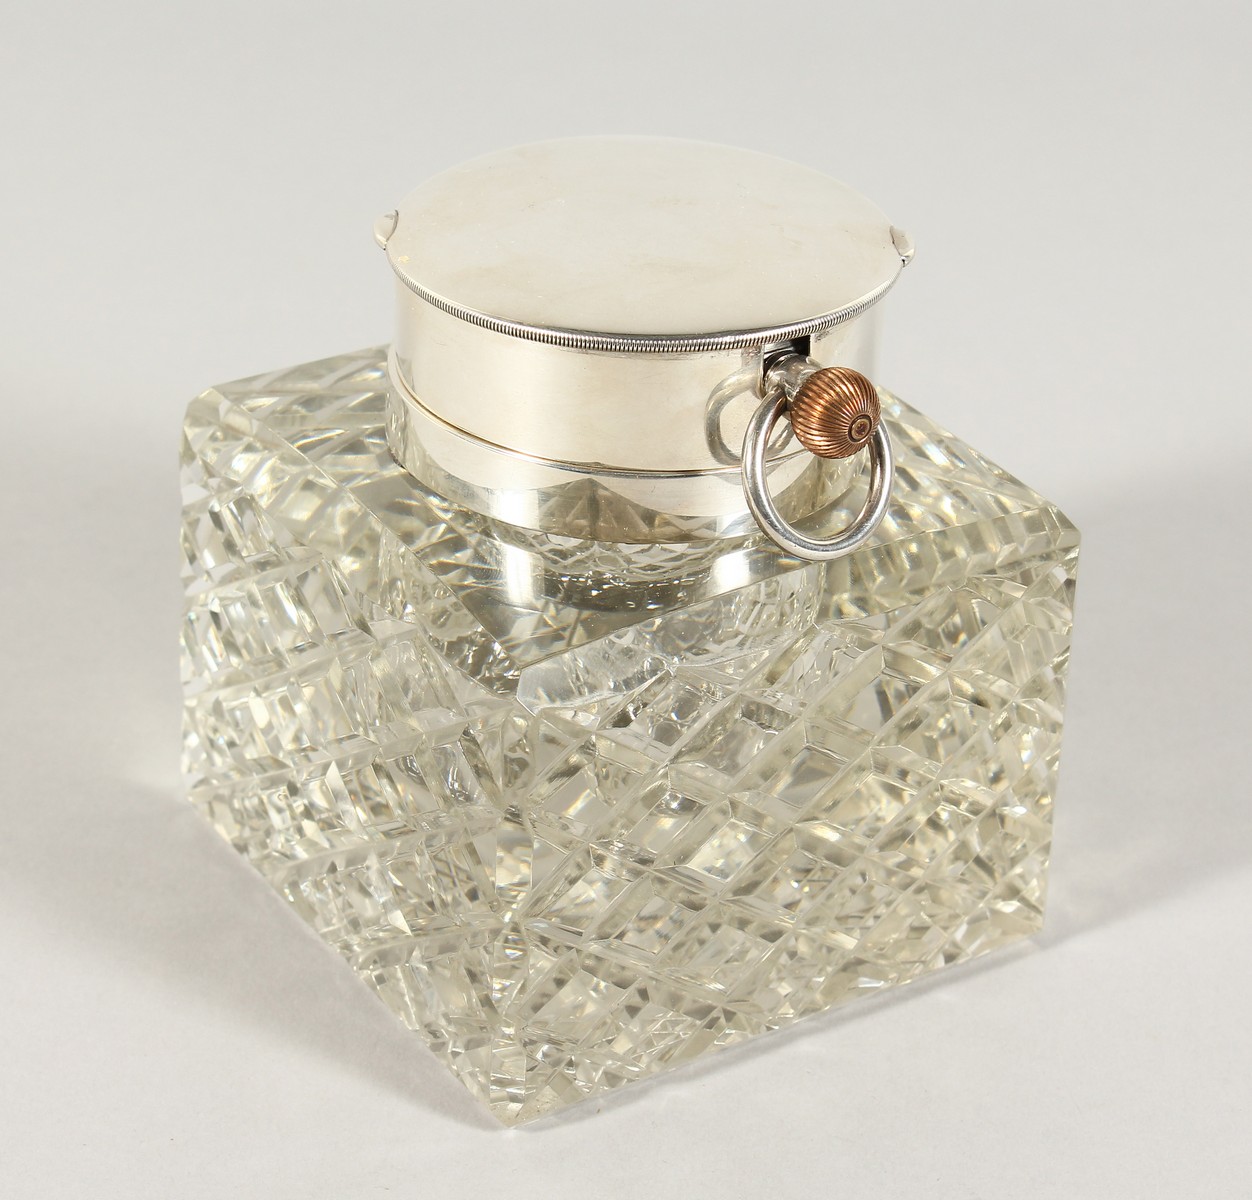 A SILVER AND CUT GLASS SQUARE INKSTAND, the top inset with a watch. 4ins square. London 1903.